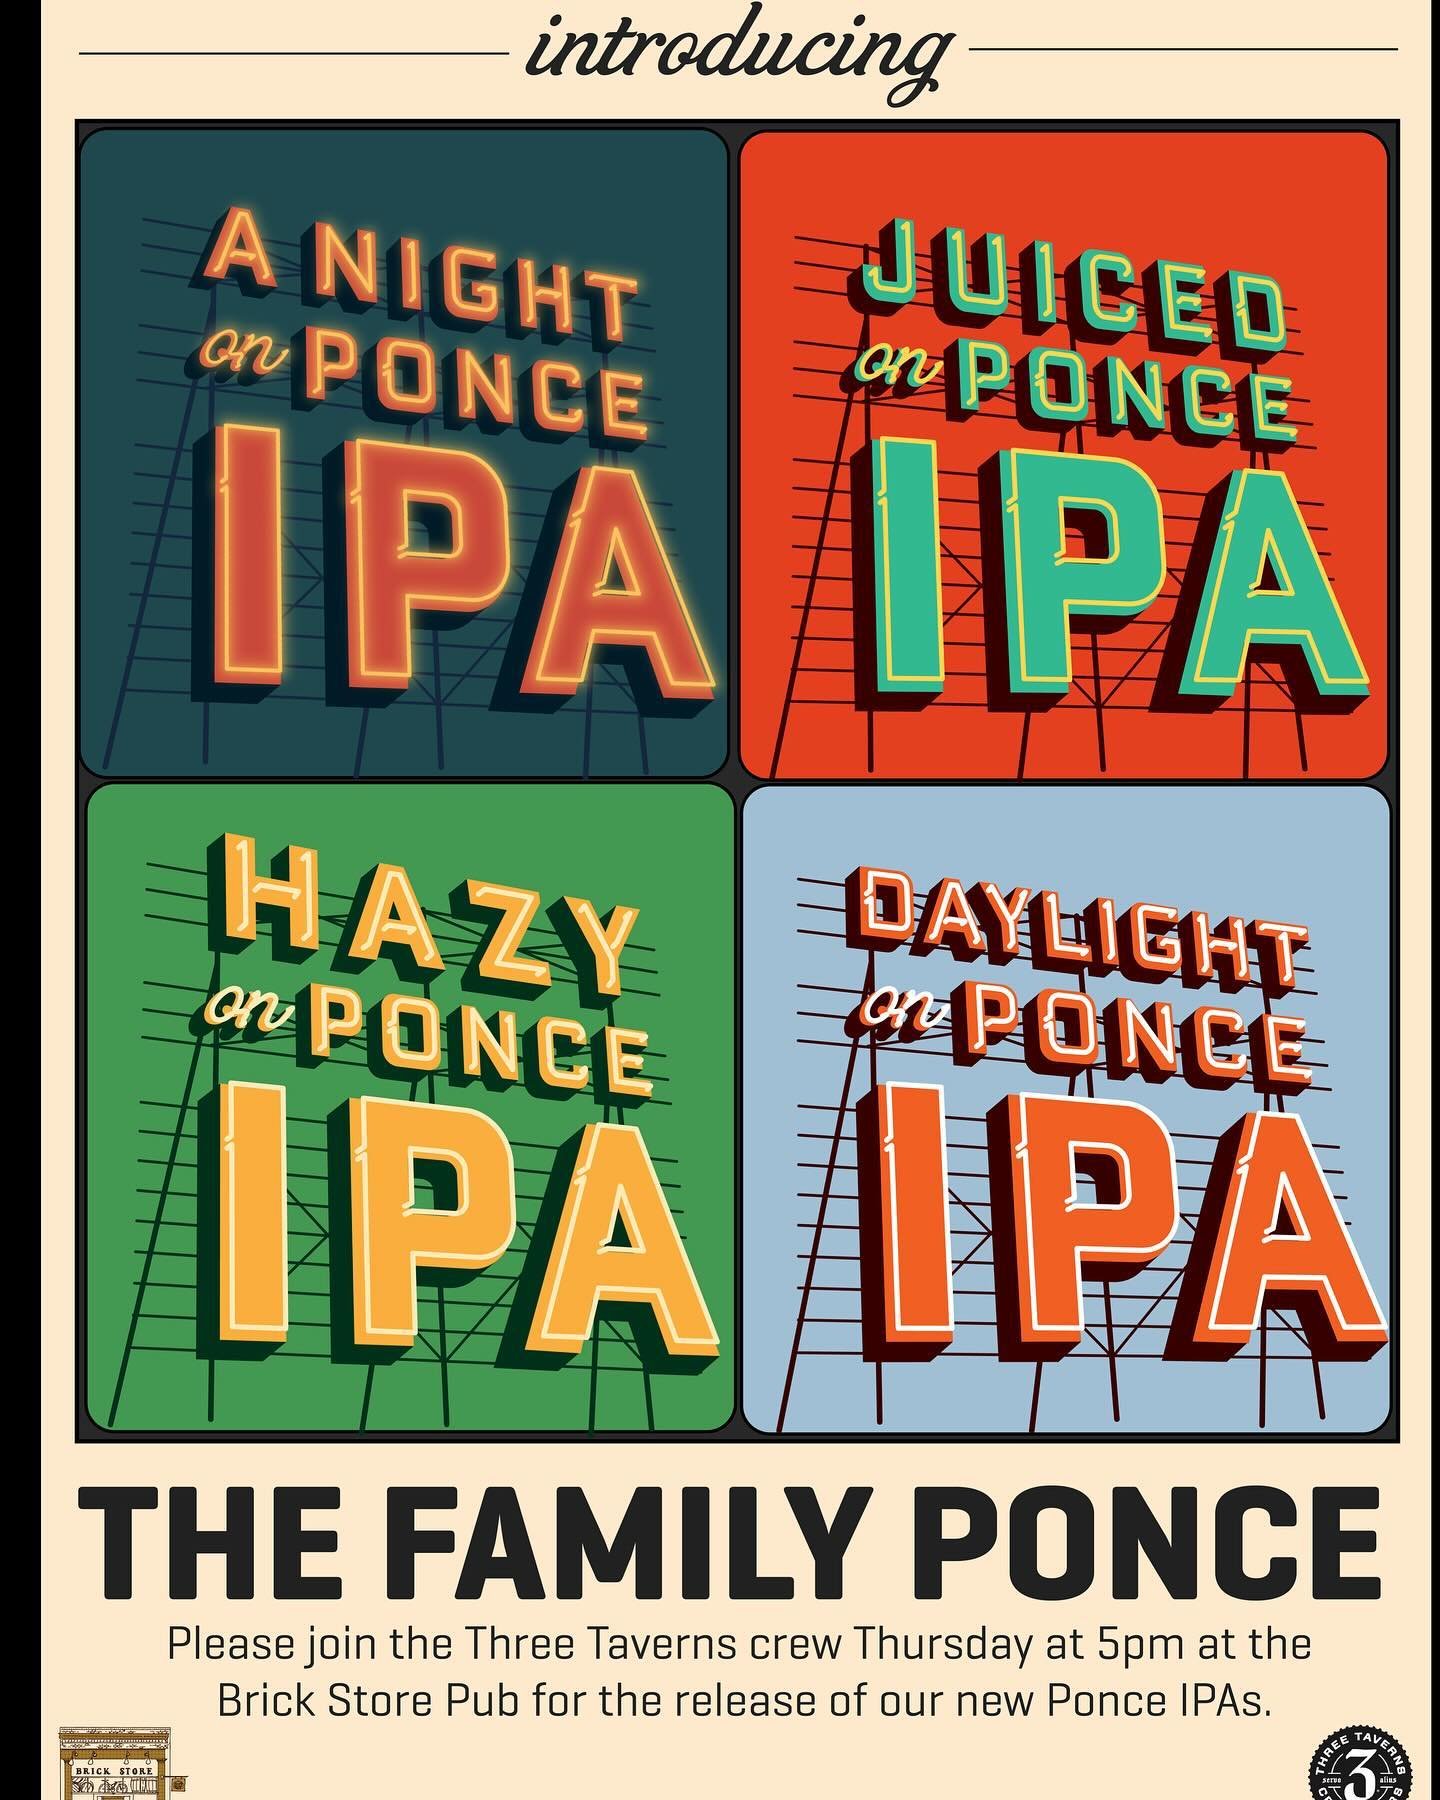 Join the Three Taverns crew tomorrow at 5pm @brickstorepub where we&rsquo;ll be introducing all 3 of the new family additions to A Night On Ponce IPA! Come enjoy a pint or 3 and say hi to our founder, our brewmaster, and our production crew who work 